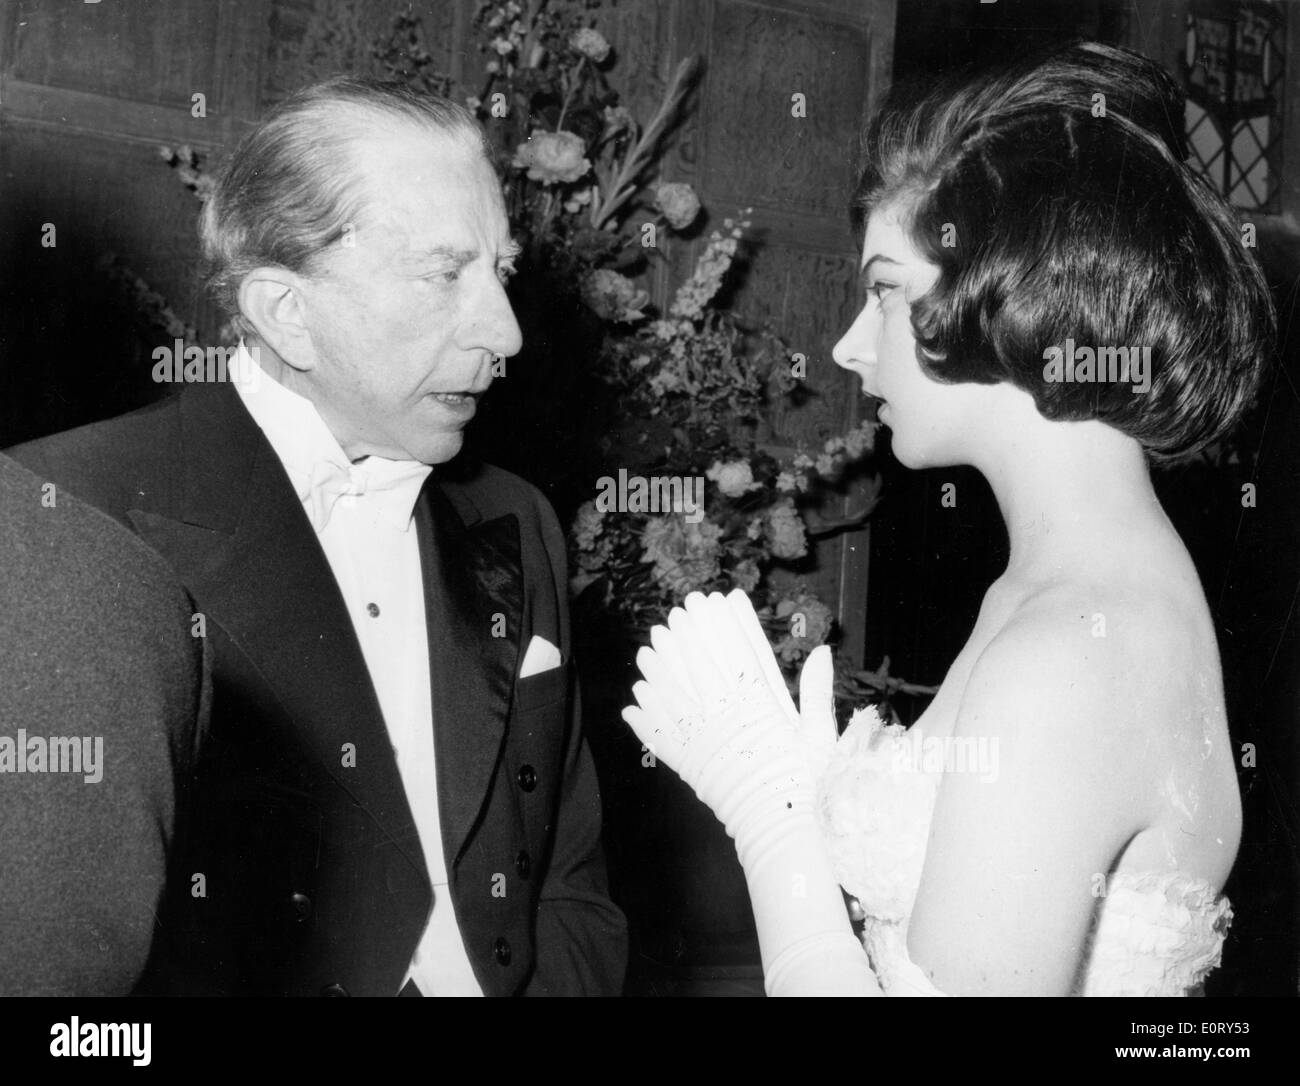 Industrialist J. Paul Getty talks with woman at party Stock Photo